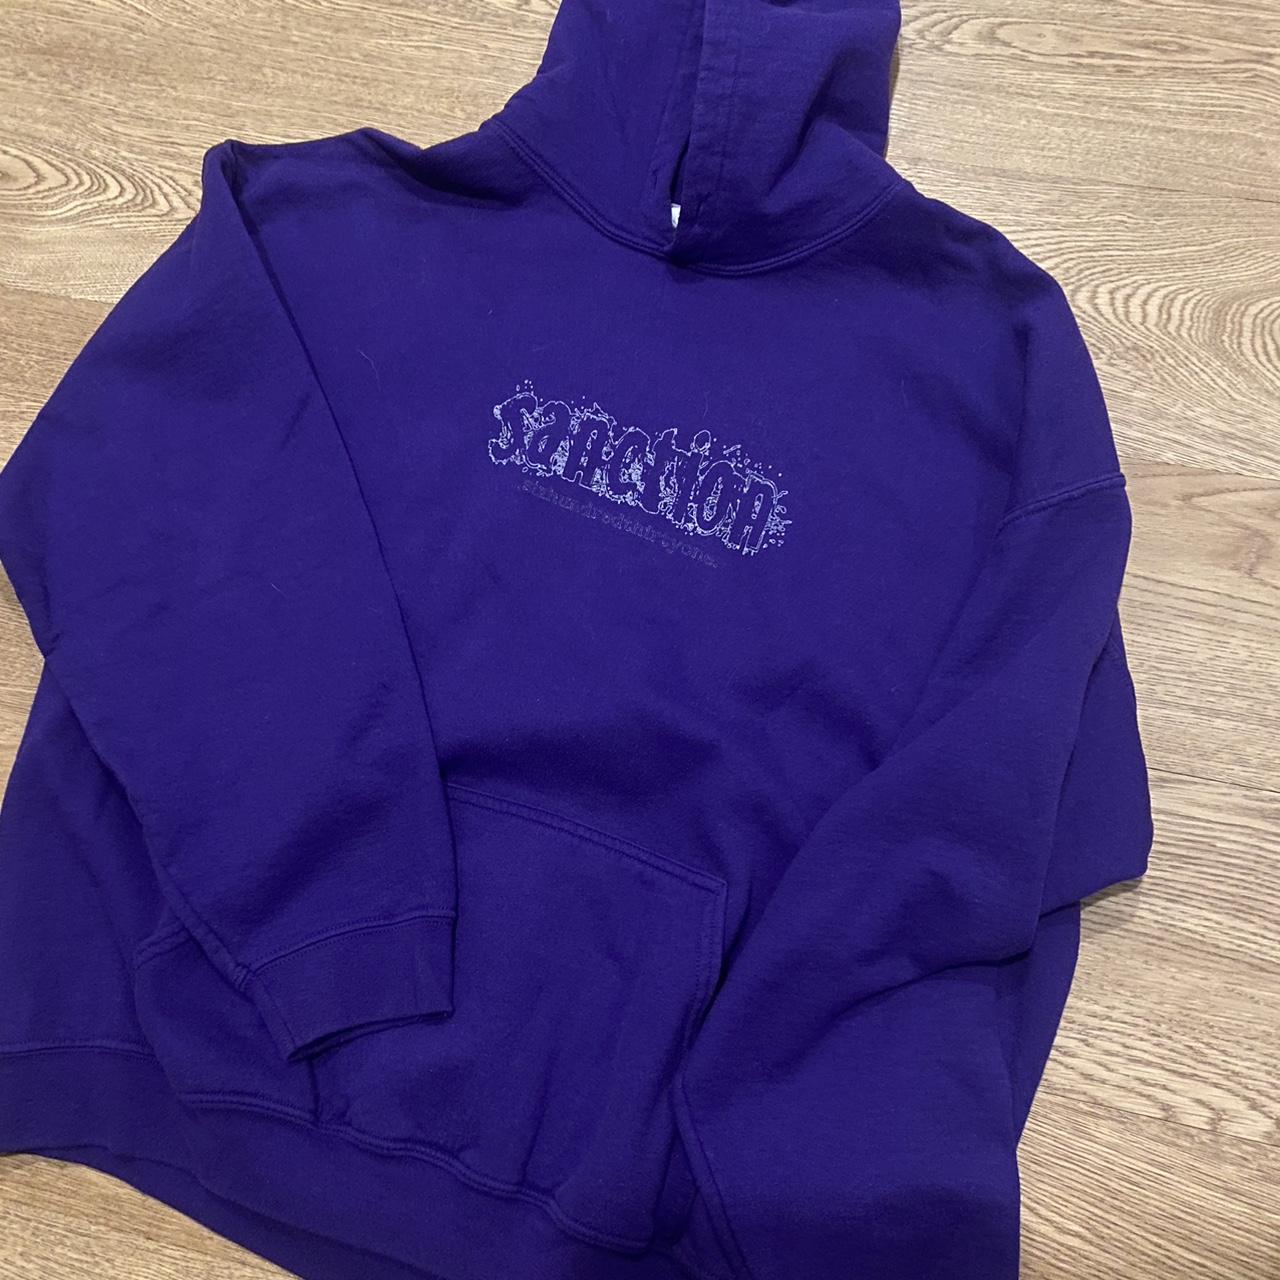 DM TO PURCHASE/PAYPAL OPTION rare sanction hoodie... - Depop